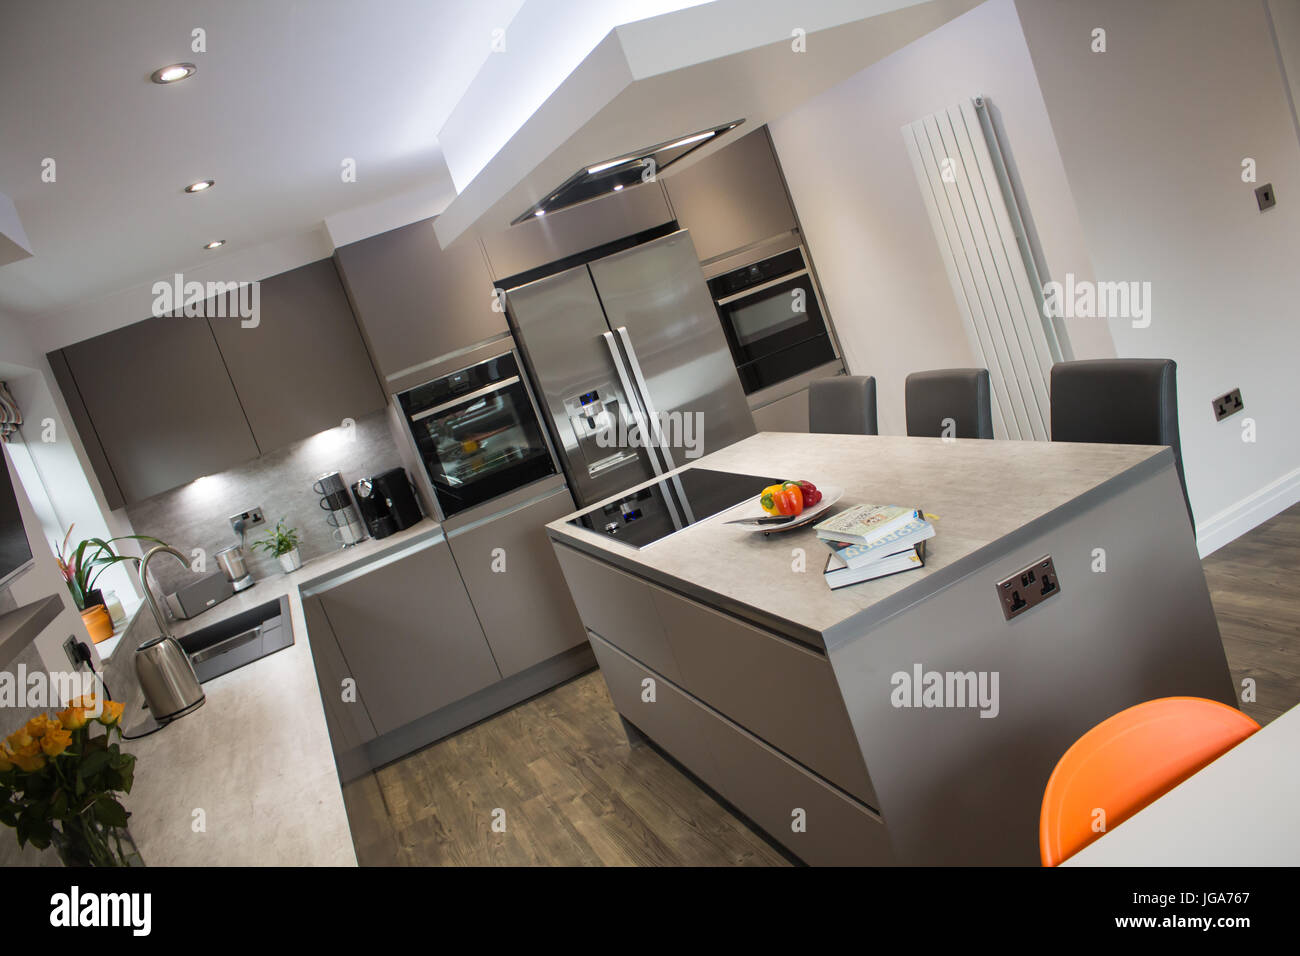 A modern, matt grey kitchen interior showing a centre island with dining stools Stock Photo